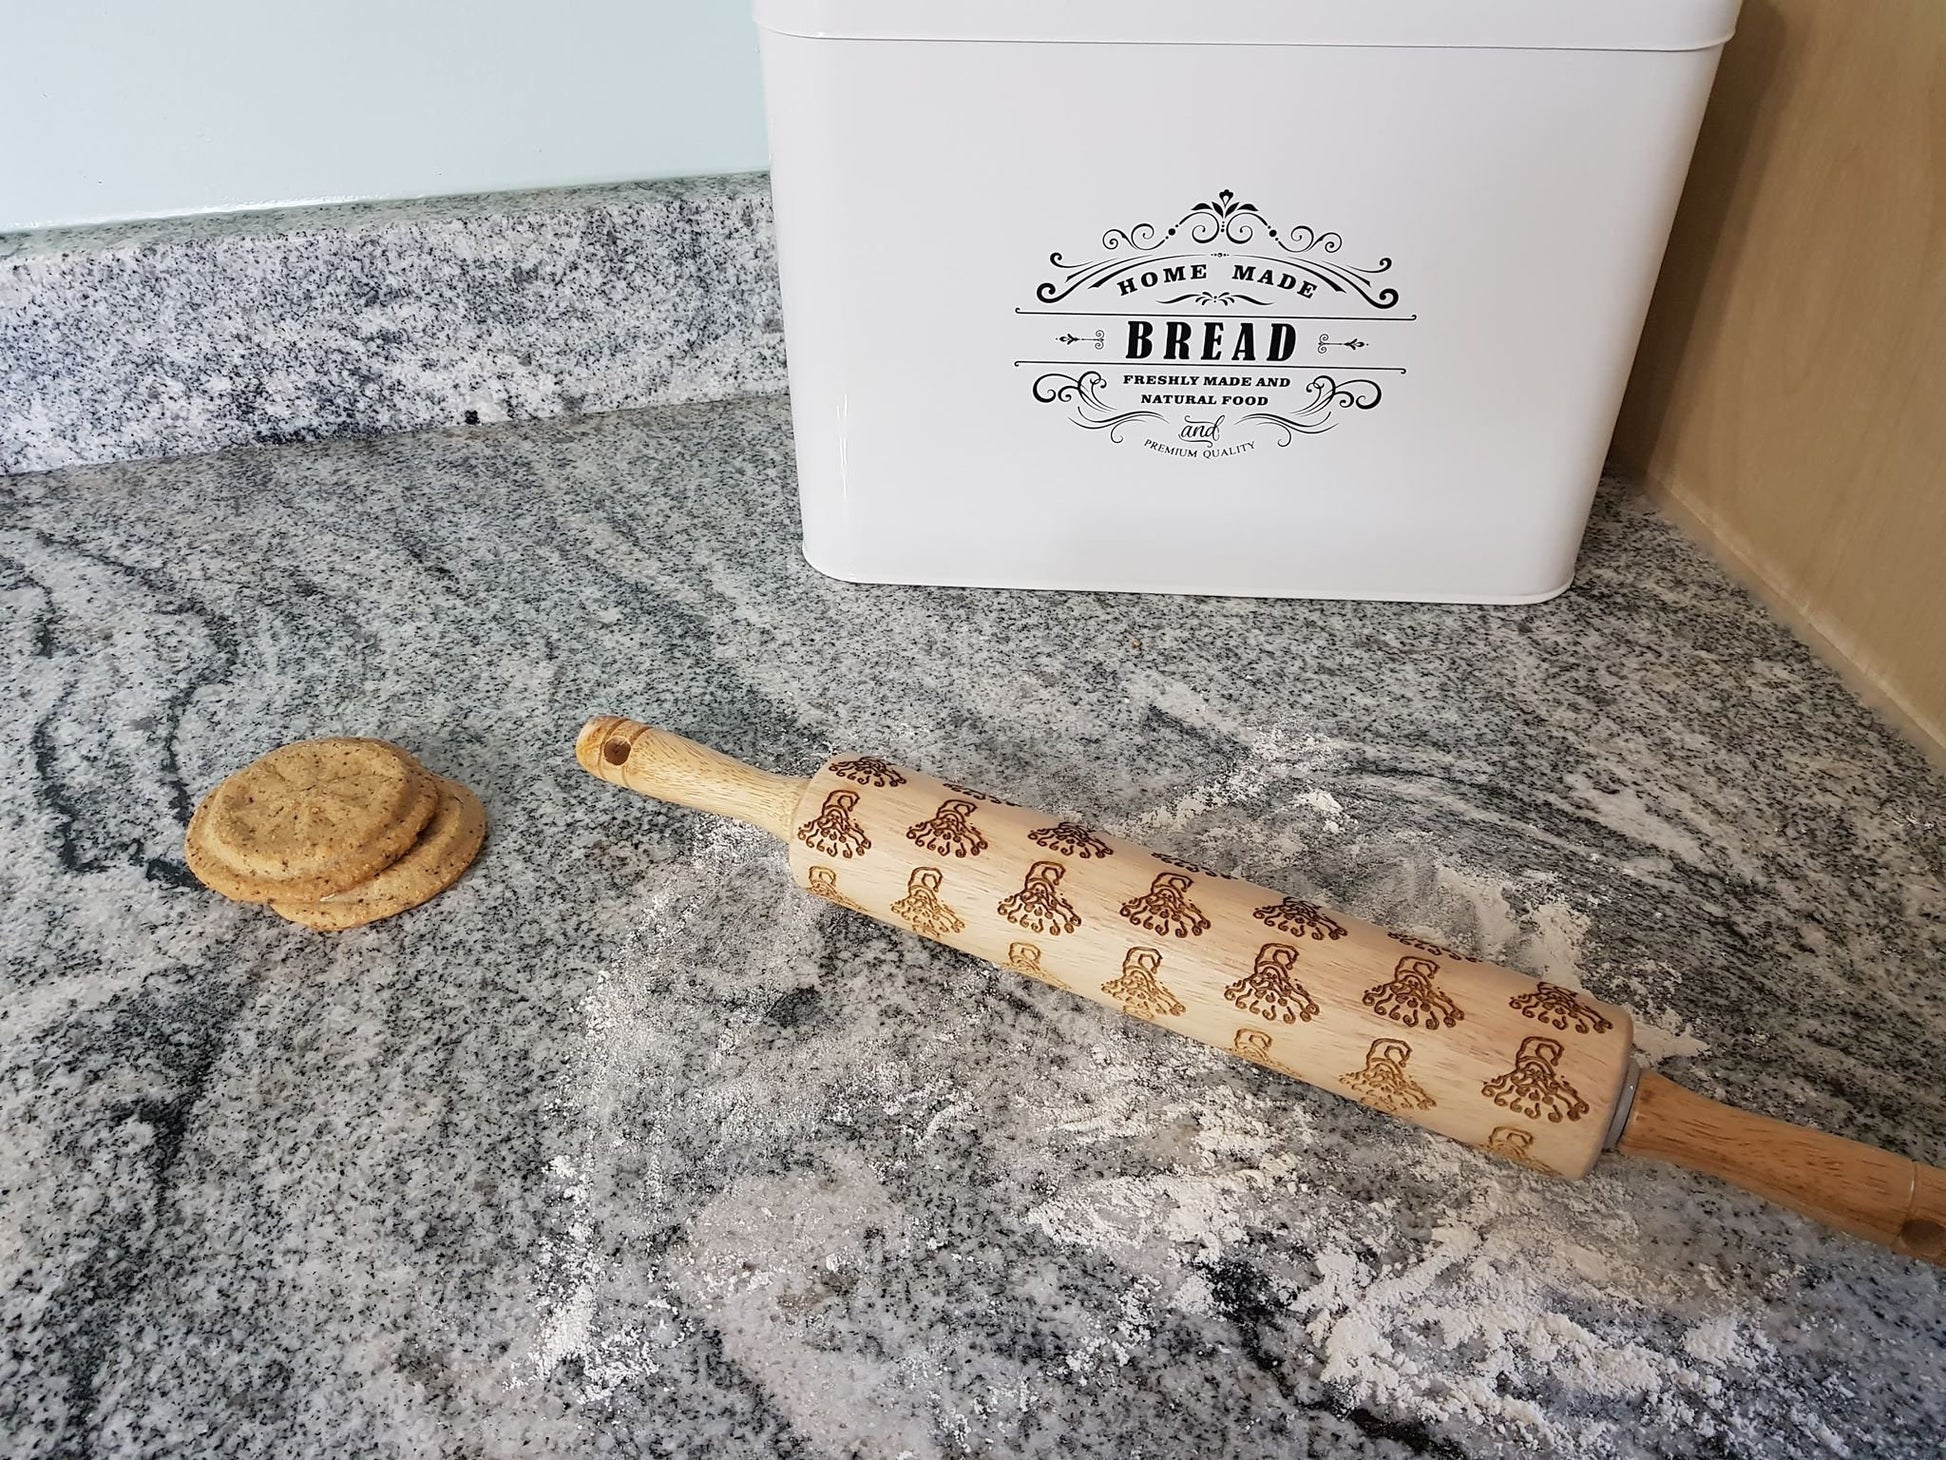 Santa Claus, Christmas, Face, Winter, Texture, Embossed, Engraved, Wooden Rolling Pin, Cookie Stamp, Laser, Hardwood 10 inch, pottery